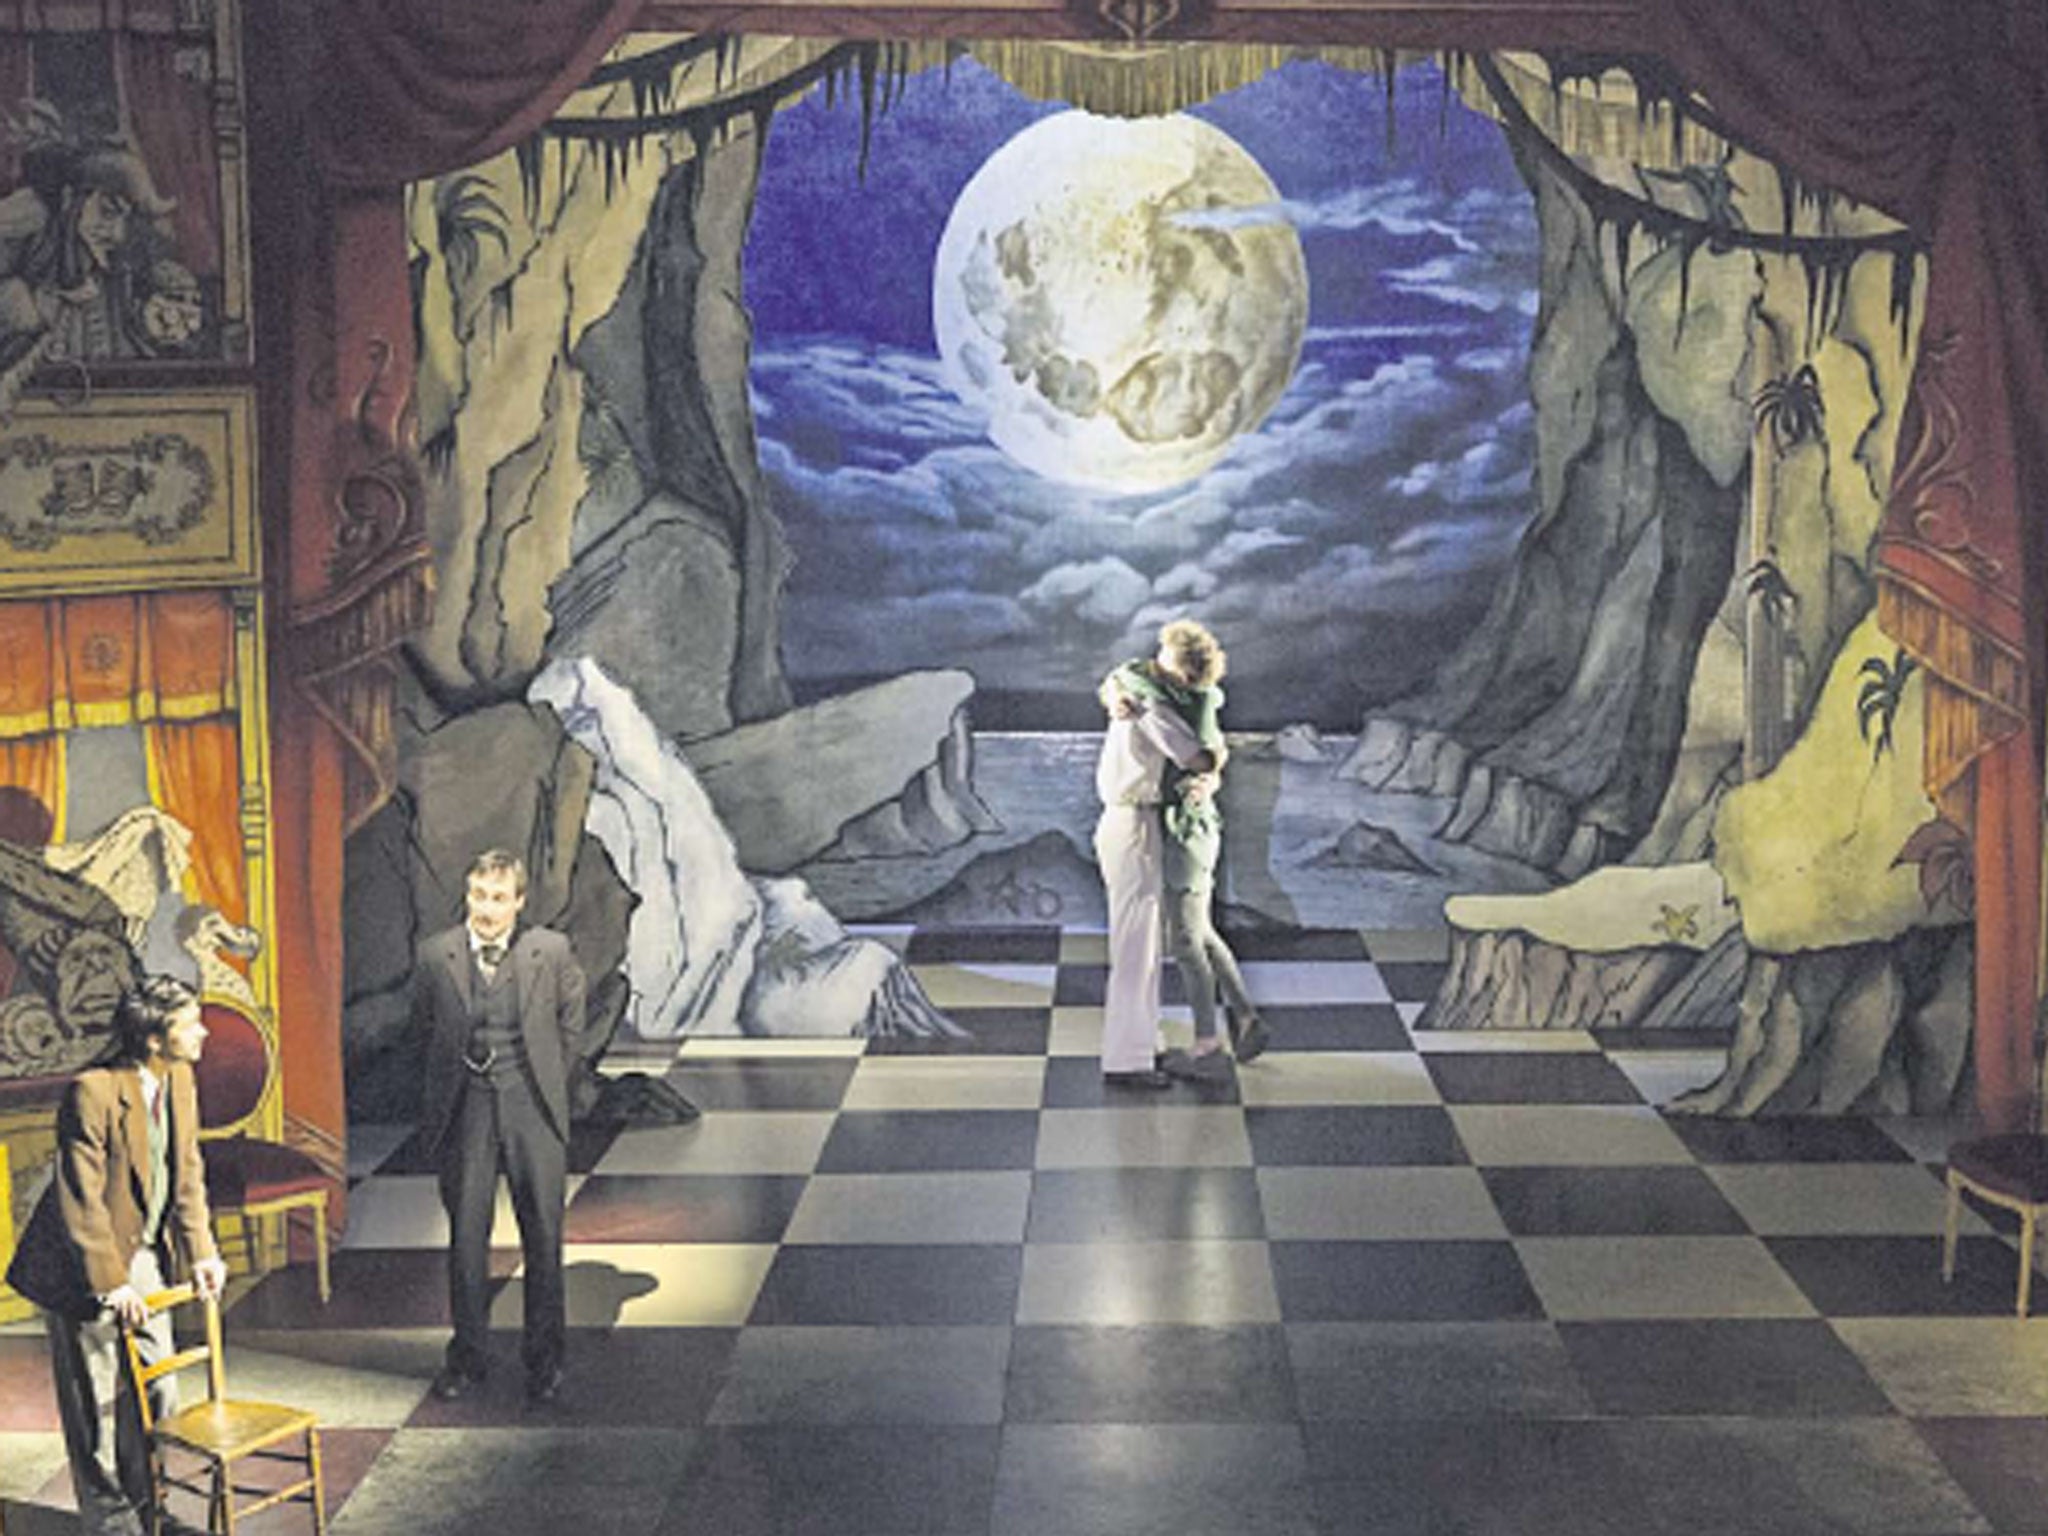 Christopher Oram’s spectacular set enriches Peter and Alice